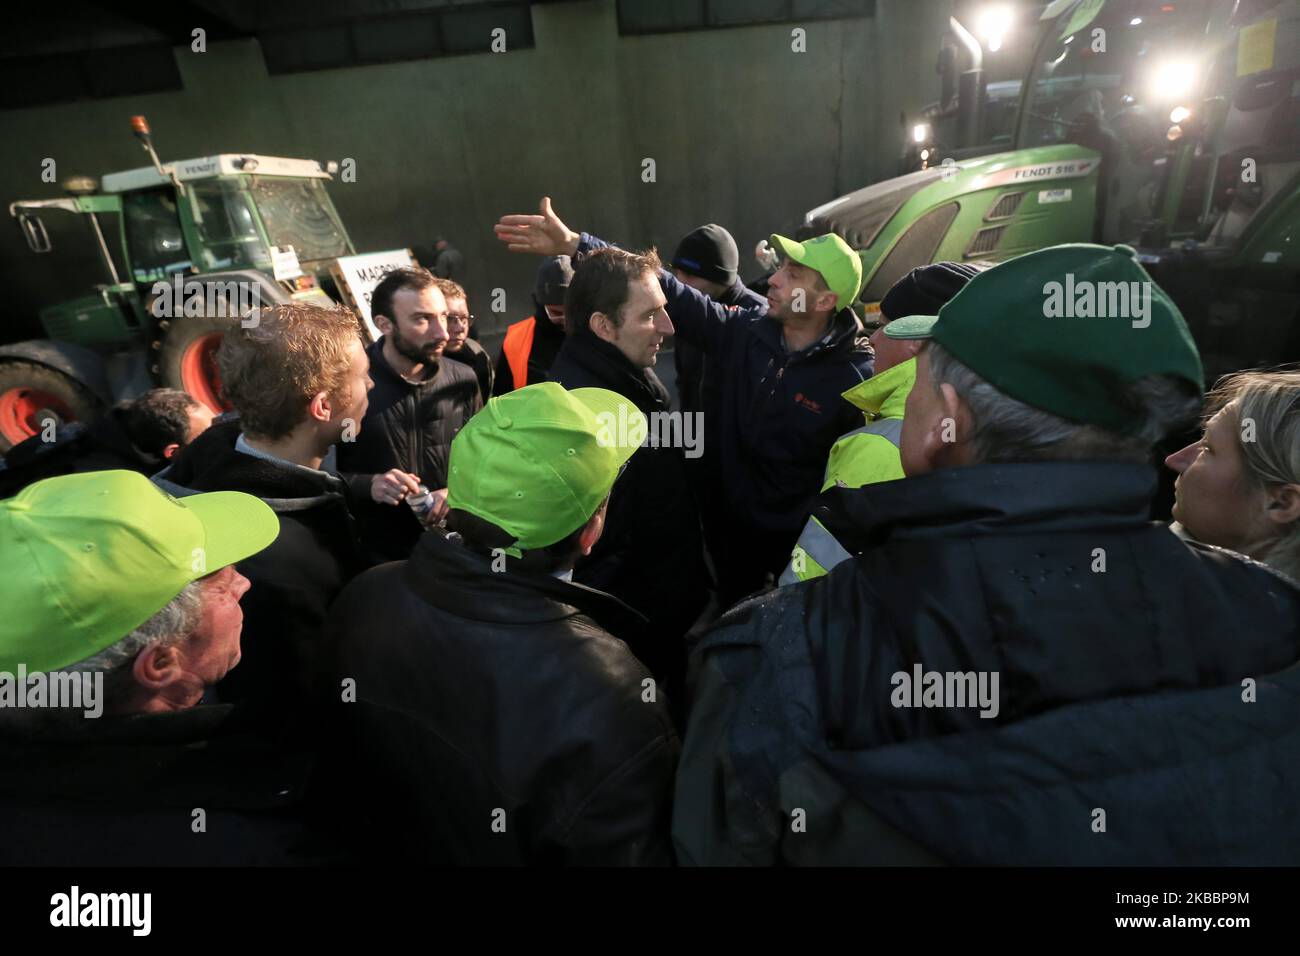 French farmers steer their tractors on The Parisian ring road (Peripherique) at Porte Dauphine in Paris on November 27, 2019, during a protest against government policies. Hundreds of French farmers descended on Paris by tractor to protest the struggles of the farming community and put pressure on supermarket chains to pay them more for their produce. Some 340 kilometres (210 miles) of tailbacks were reported during rush hour in Paris as convoys of tractors snarled traffic along the main roads into the capital. (Photo by Michel Stoupak/NurPhoto) Stock Photo